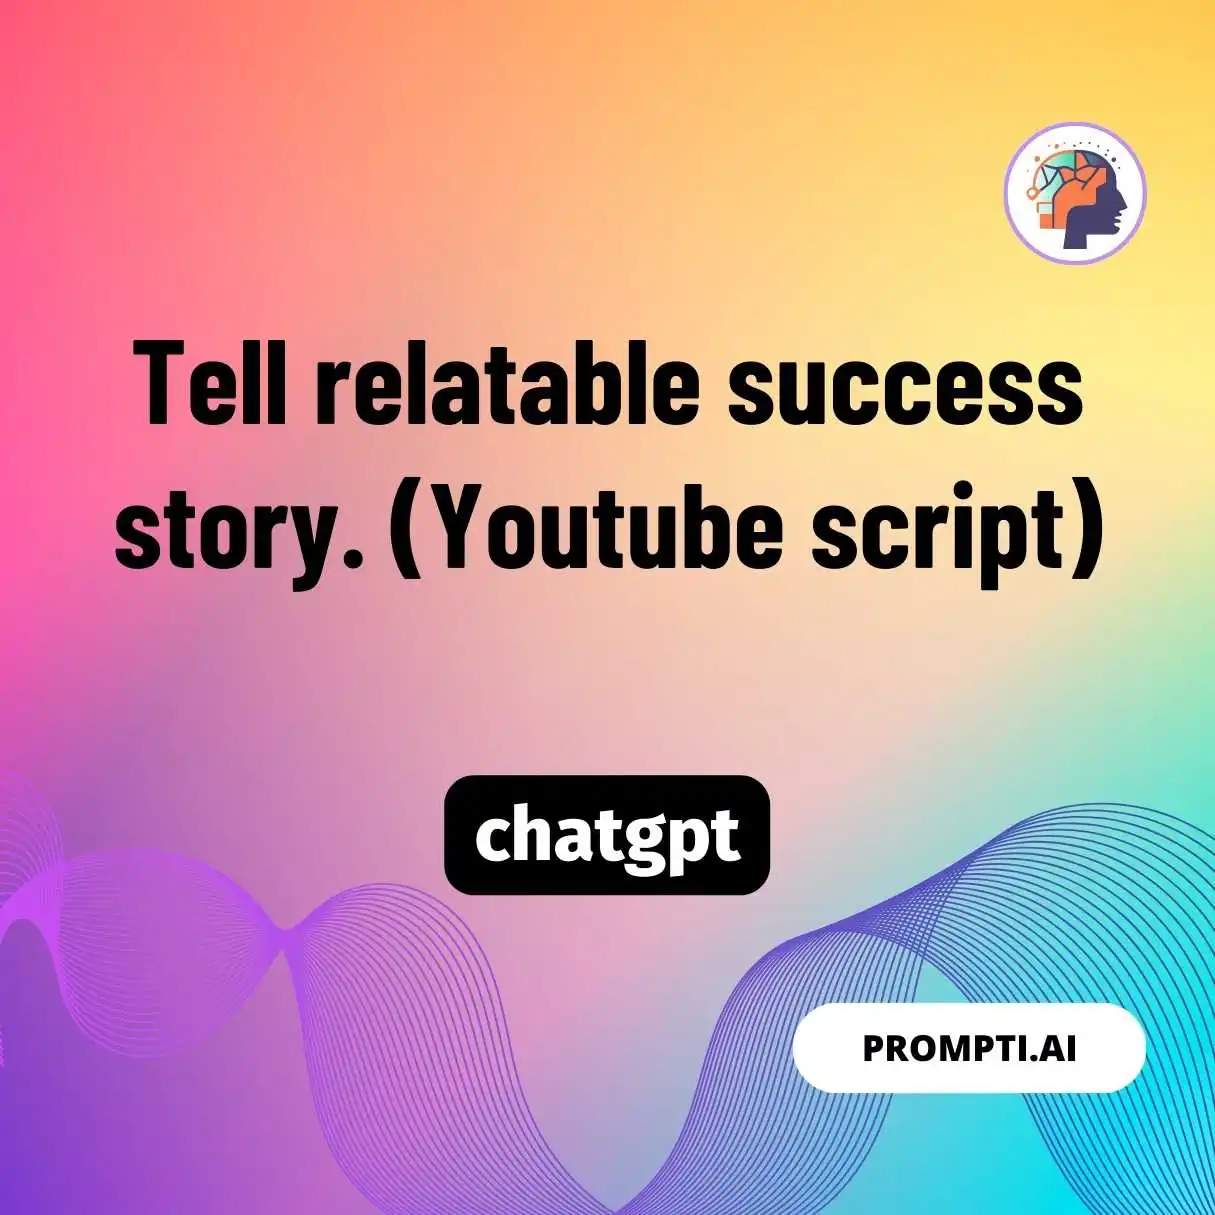 Tell relatable success story. (Youtube script)